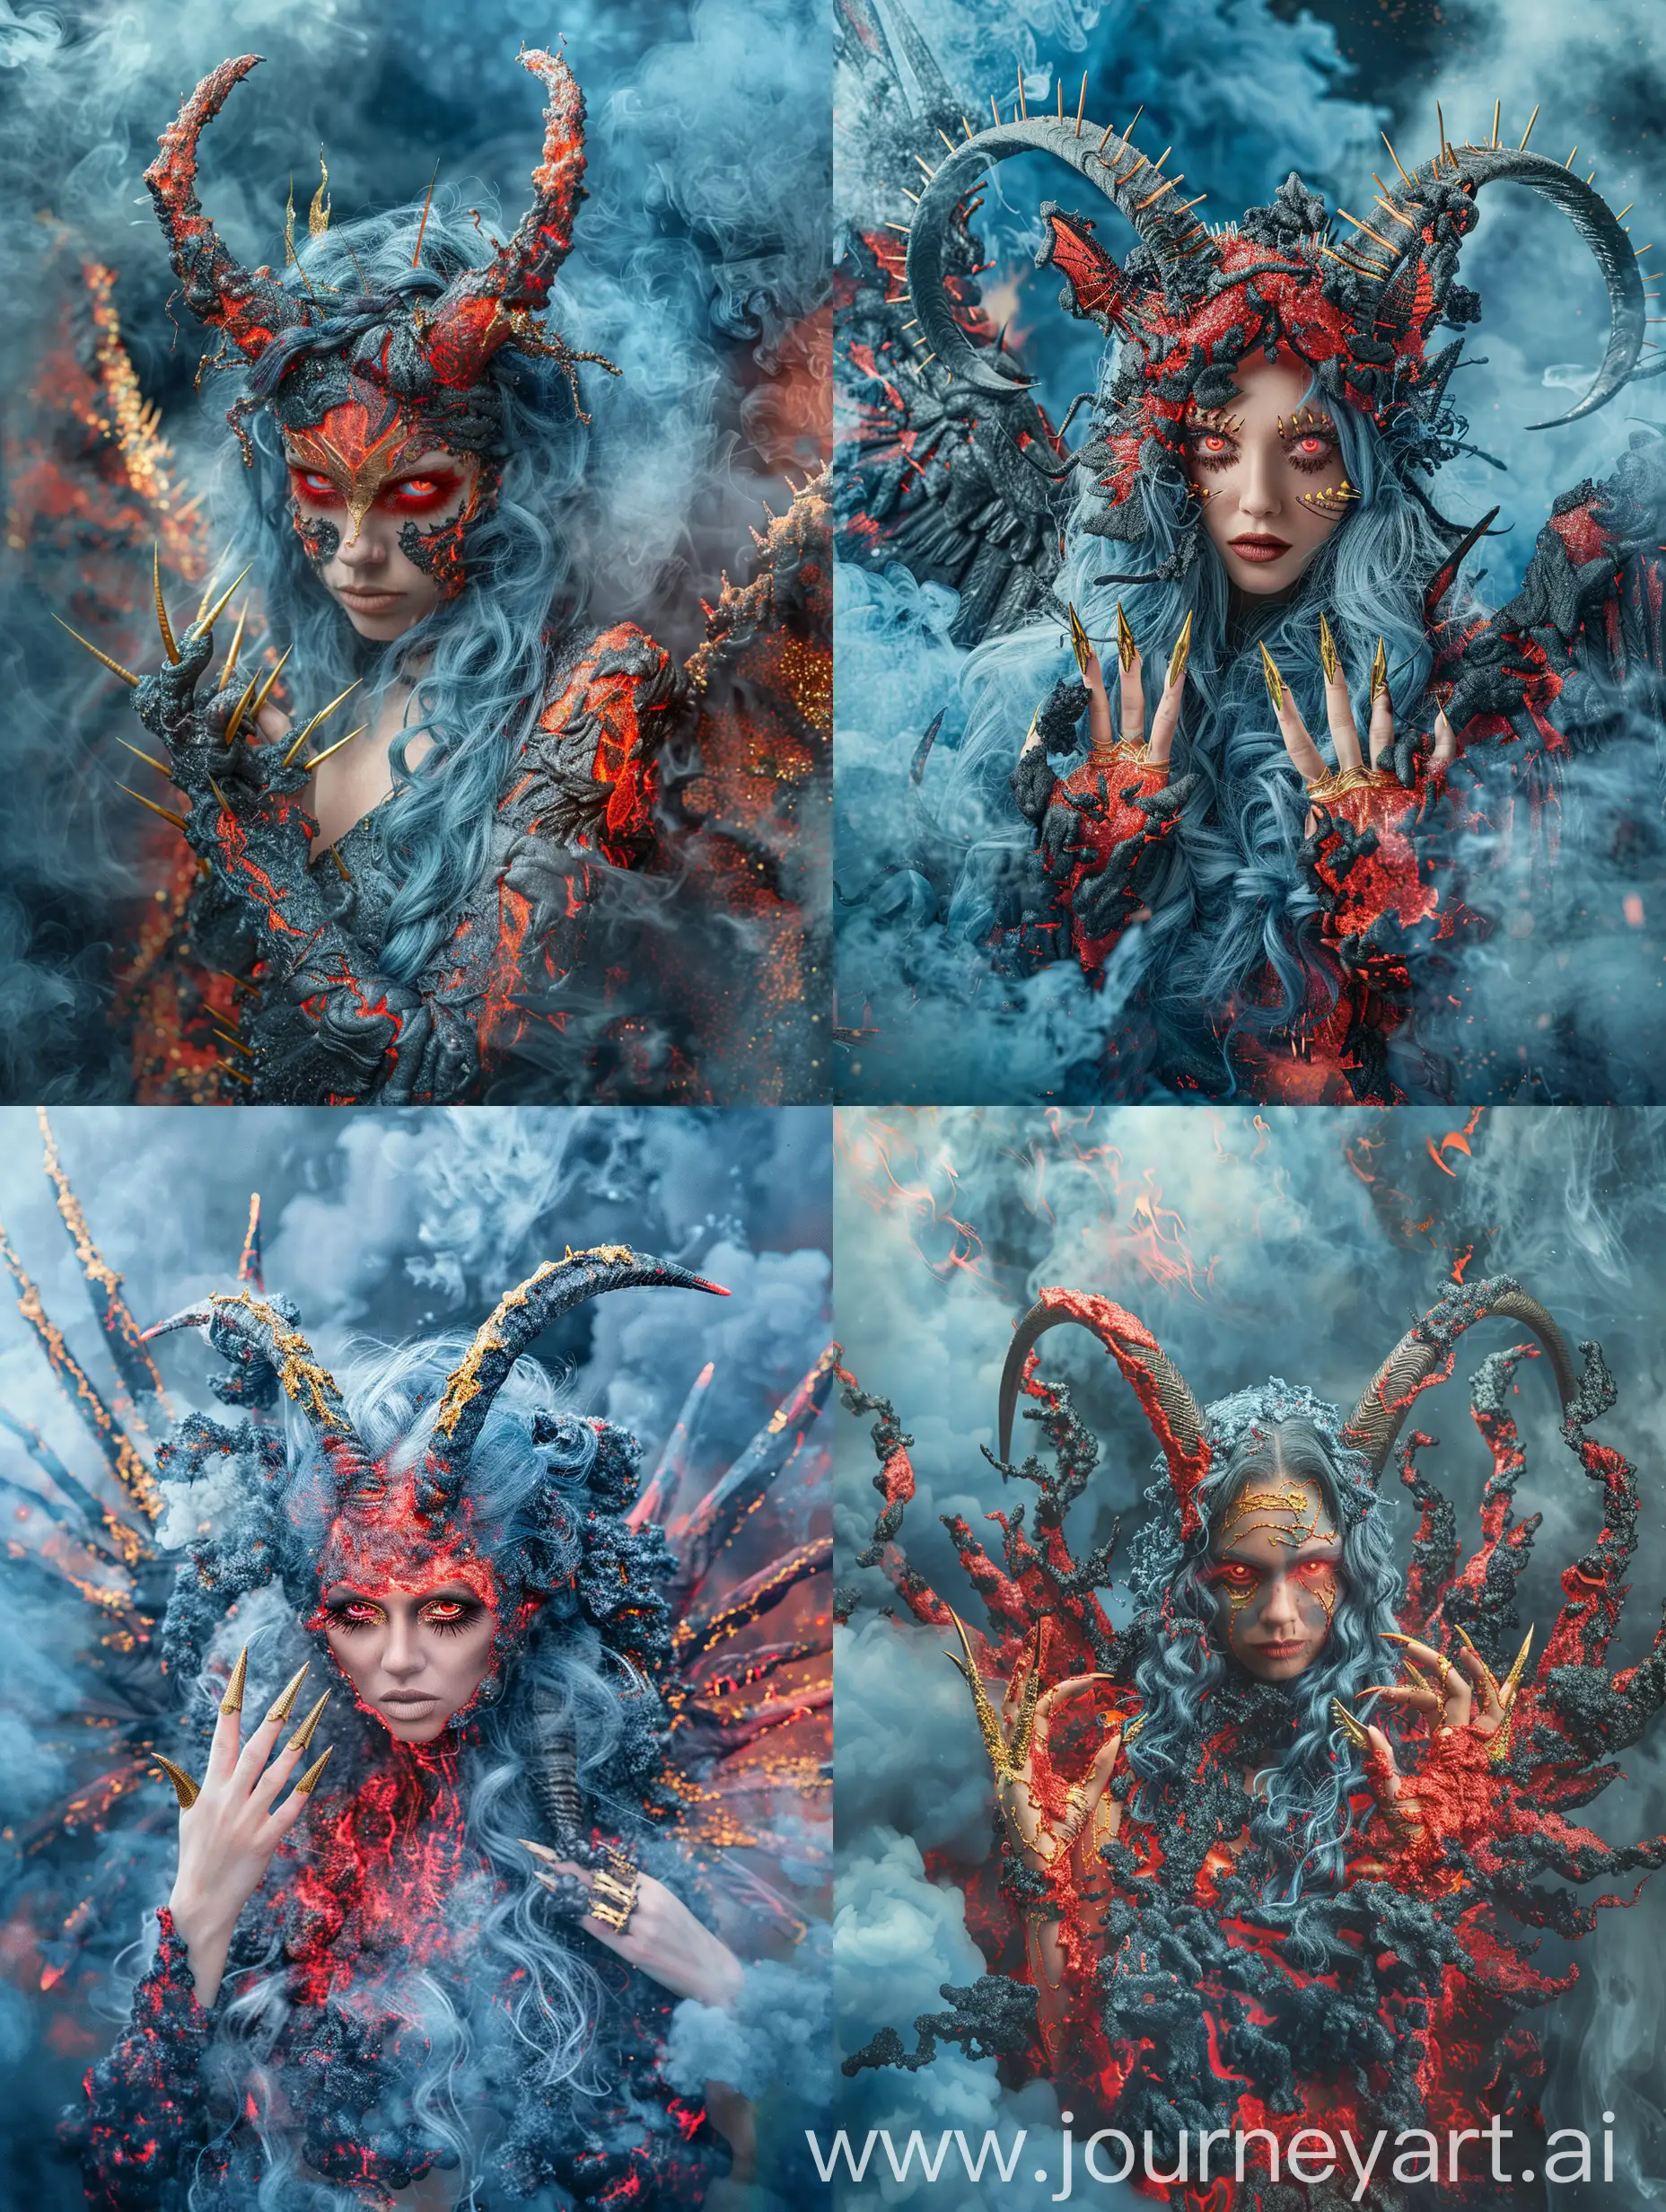 Photography, a beautiful woman, made of red and black lava, has goat horns on her head, has long grayish blue hair, fingers with sharp and pointed gold nails, has wings, all the lava is wrapped in gold, red eyes, horns Covered in gold, wings with characteristic lava with gold spines, the work is enveloped in very thick blue to gray smoke, a thick background of fire and smoke.

